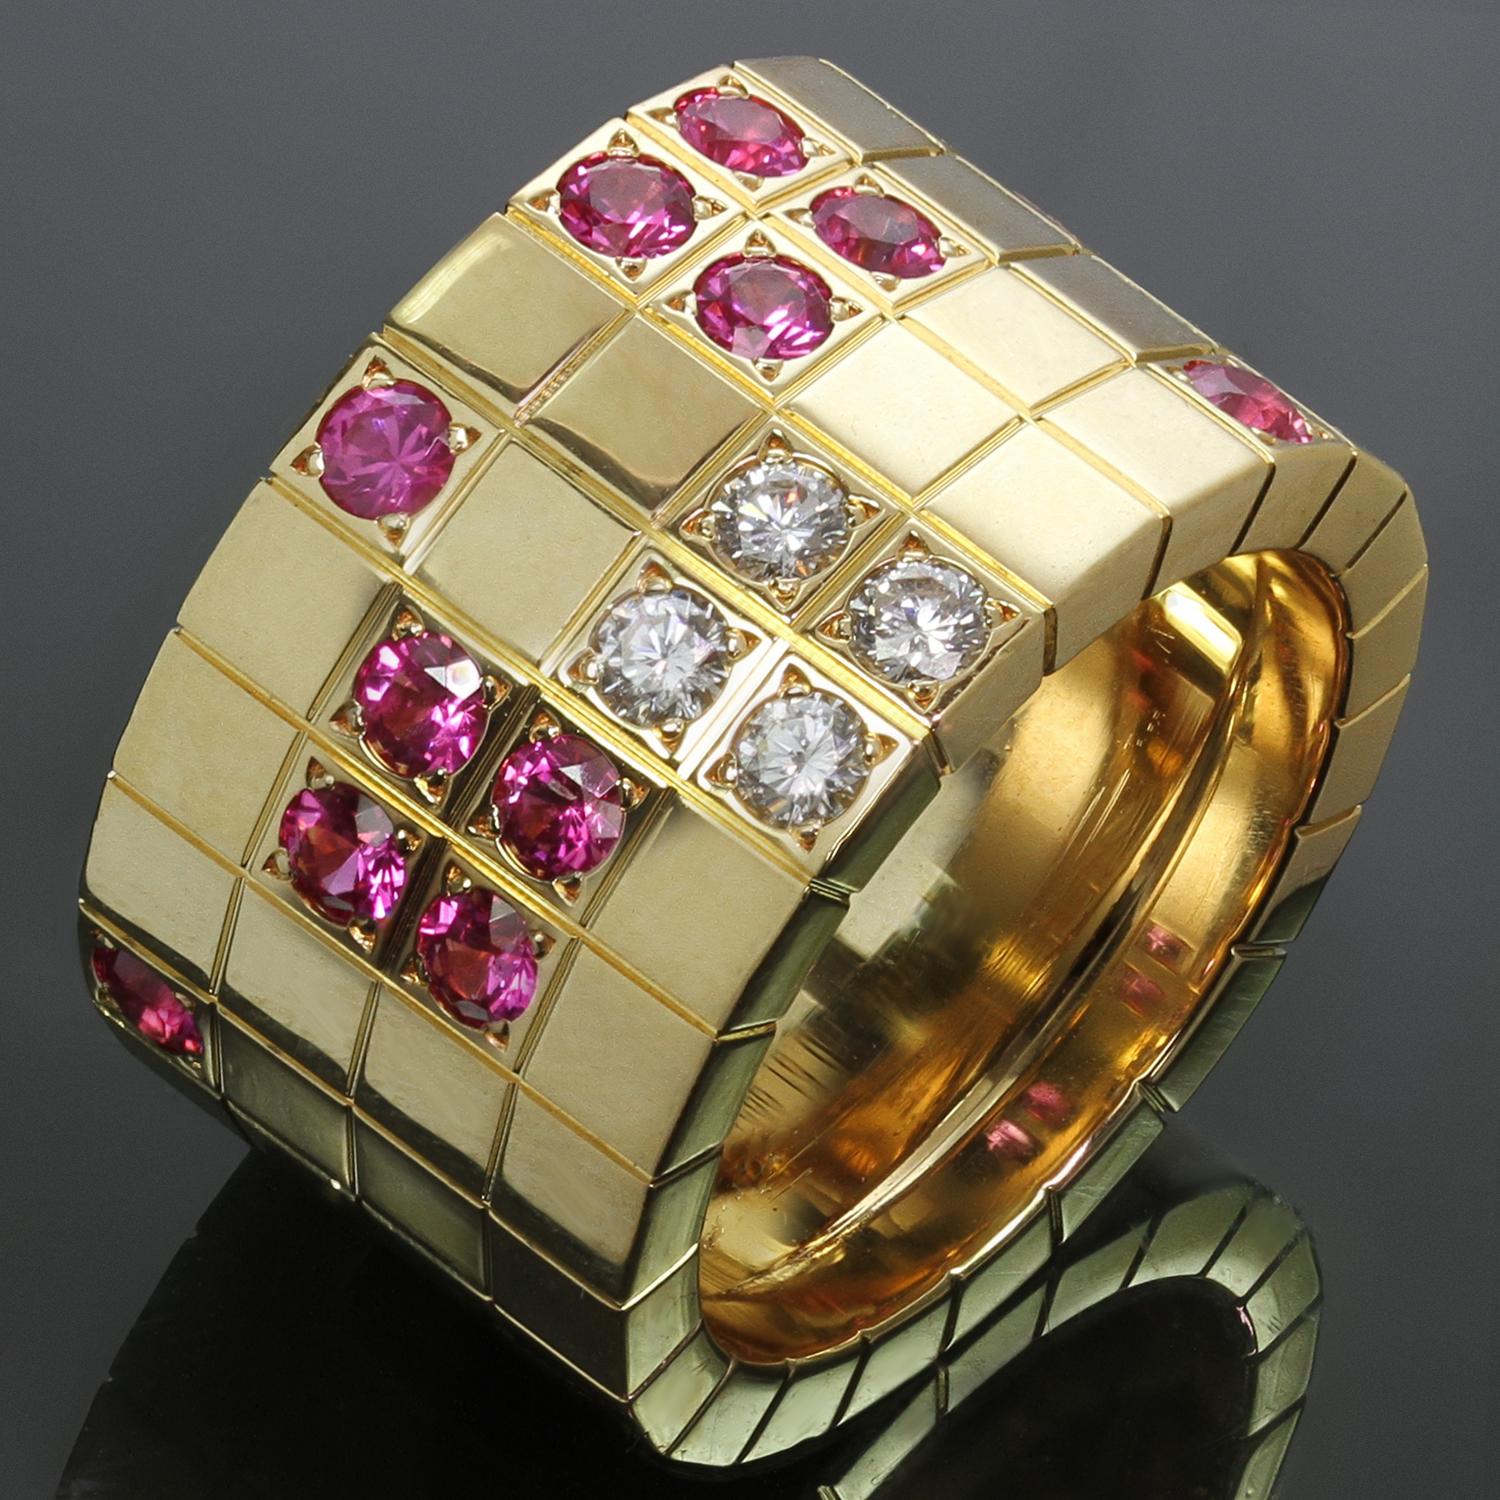 This rare wide band from Cartier's classic Lanières collection is crafted in 18k yellow gold and features a chic design of square motifs, accented by a geometric pattern of round pink sapphires and brilliant-cut round D-F diamonds. Made in France